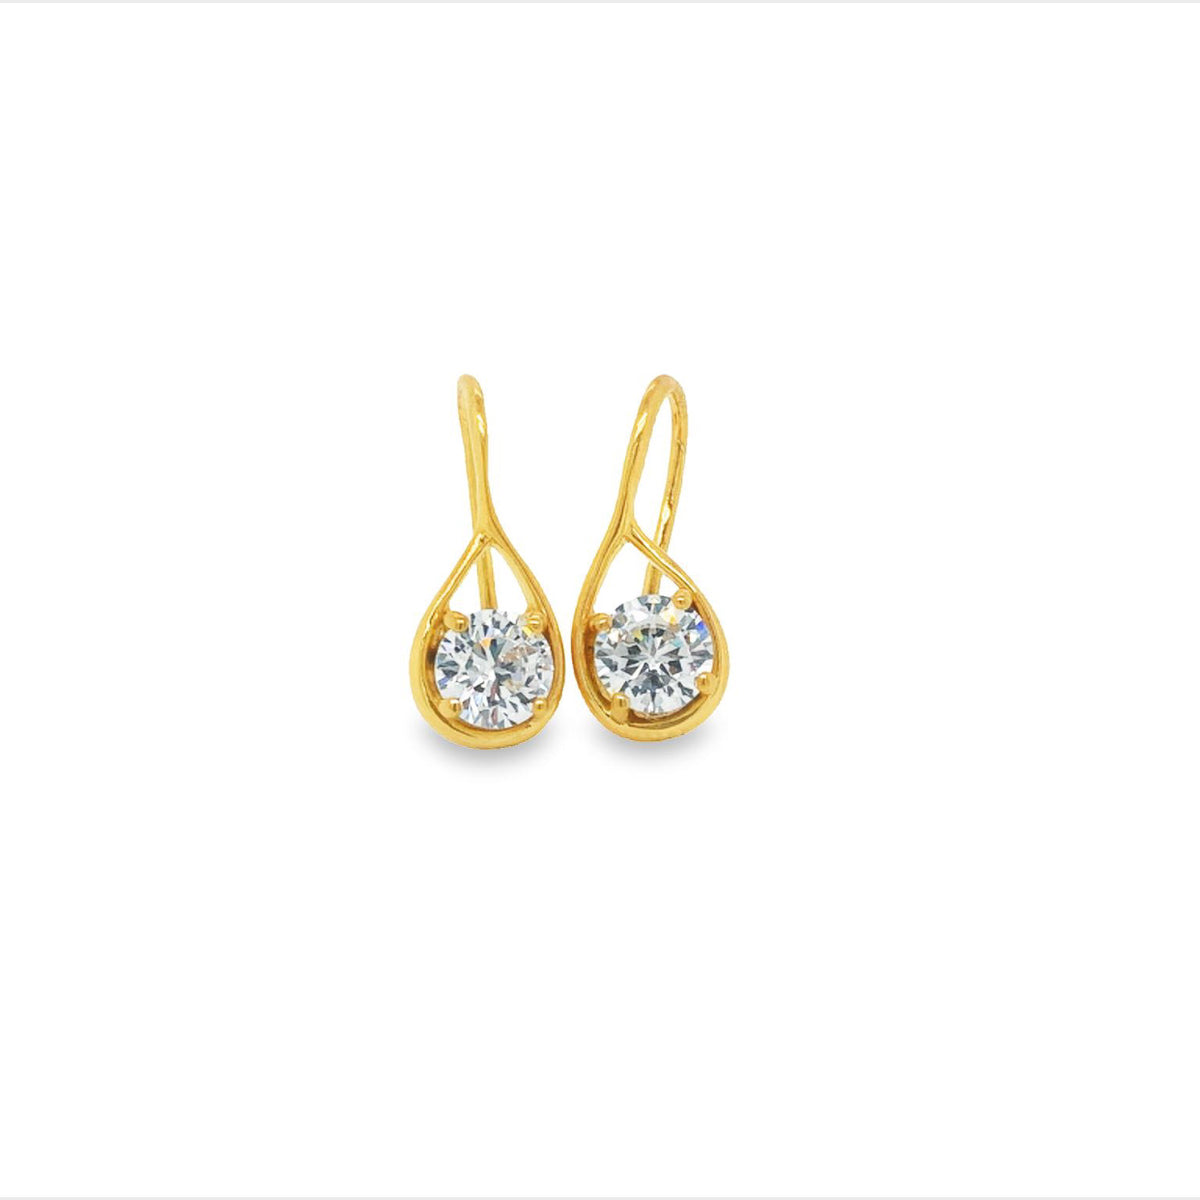 Silver Gold Plated Cz Drop Earrings With Fixed Shephooks